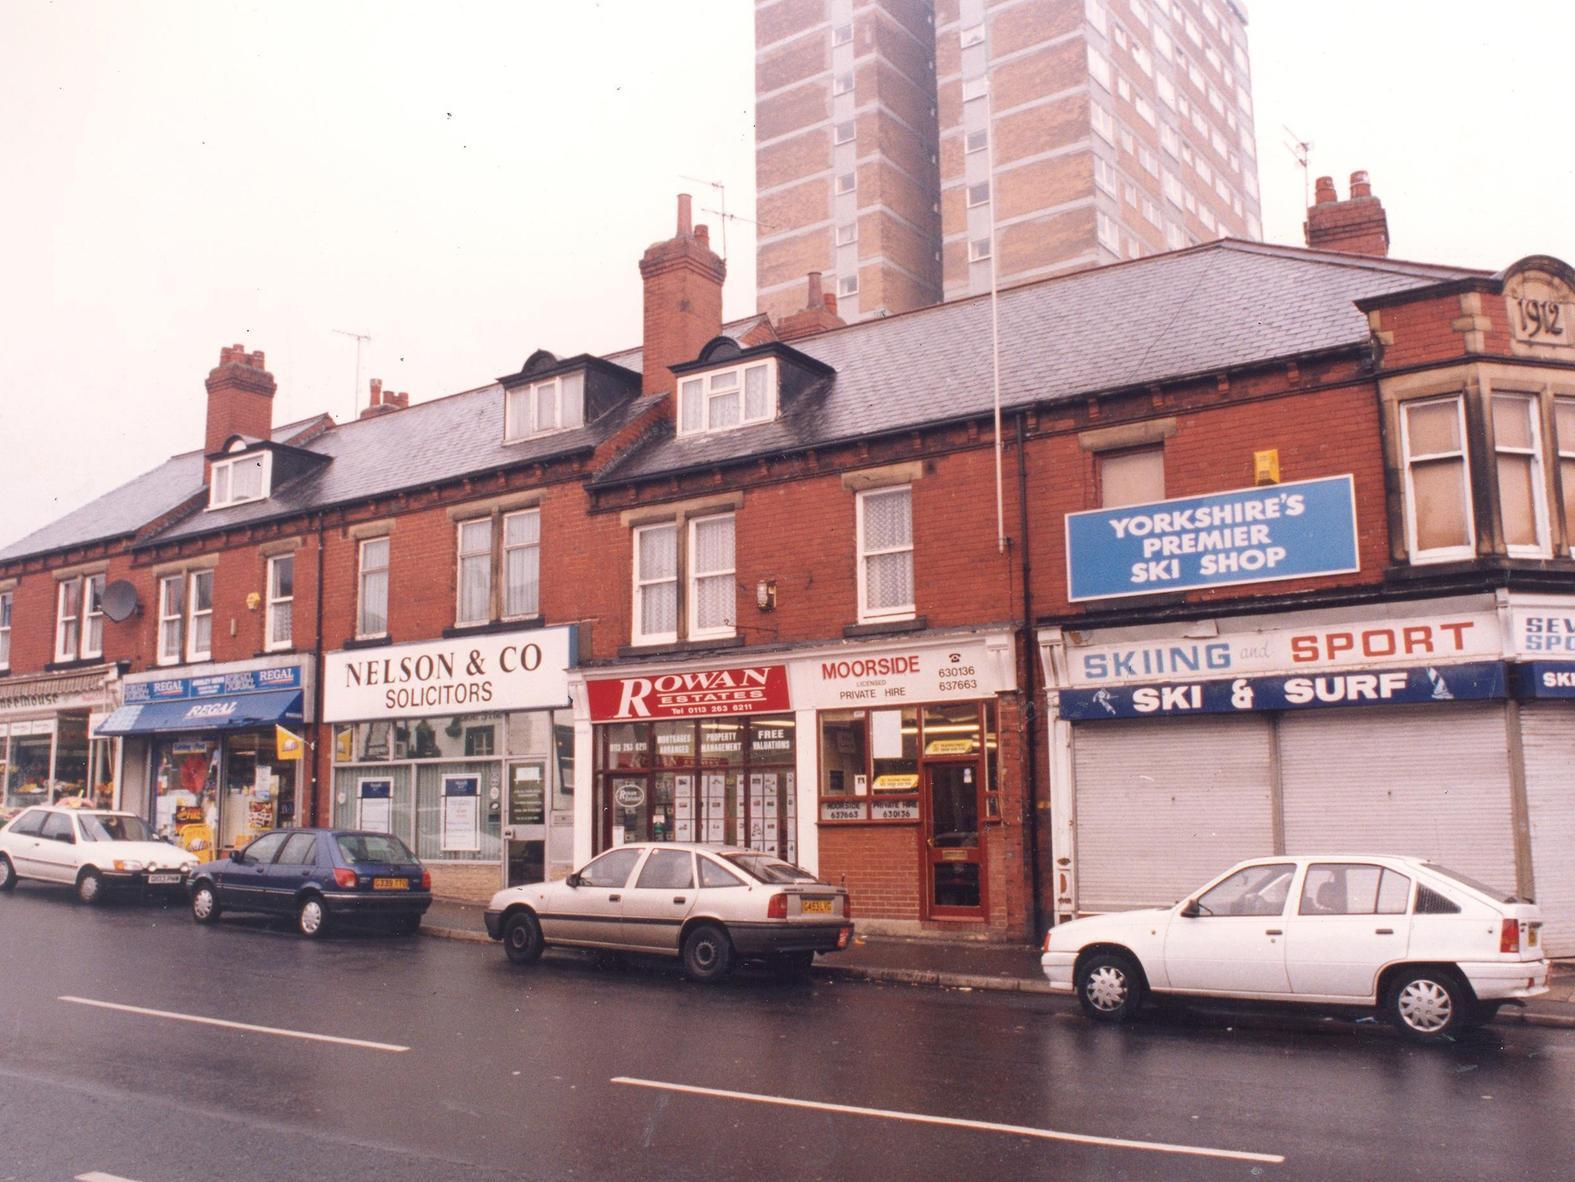 Share your memories of Armley with Andrew Hutchinson via email at: andrew.hutchinson@jpress.co.uk or tweet him - @AndyHutchYPN